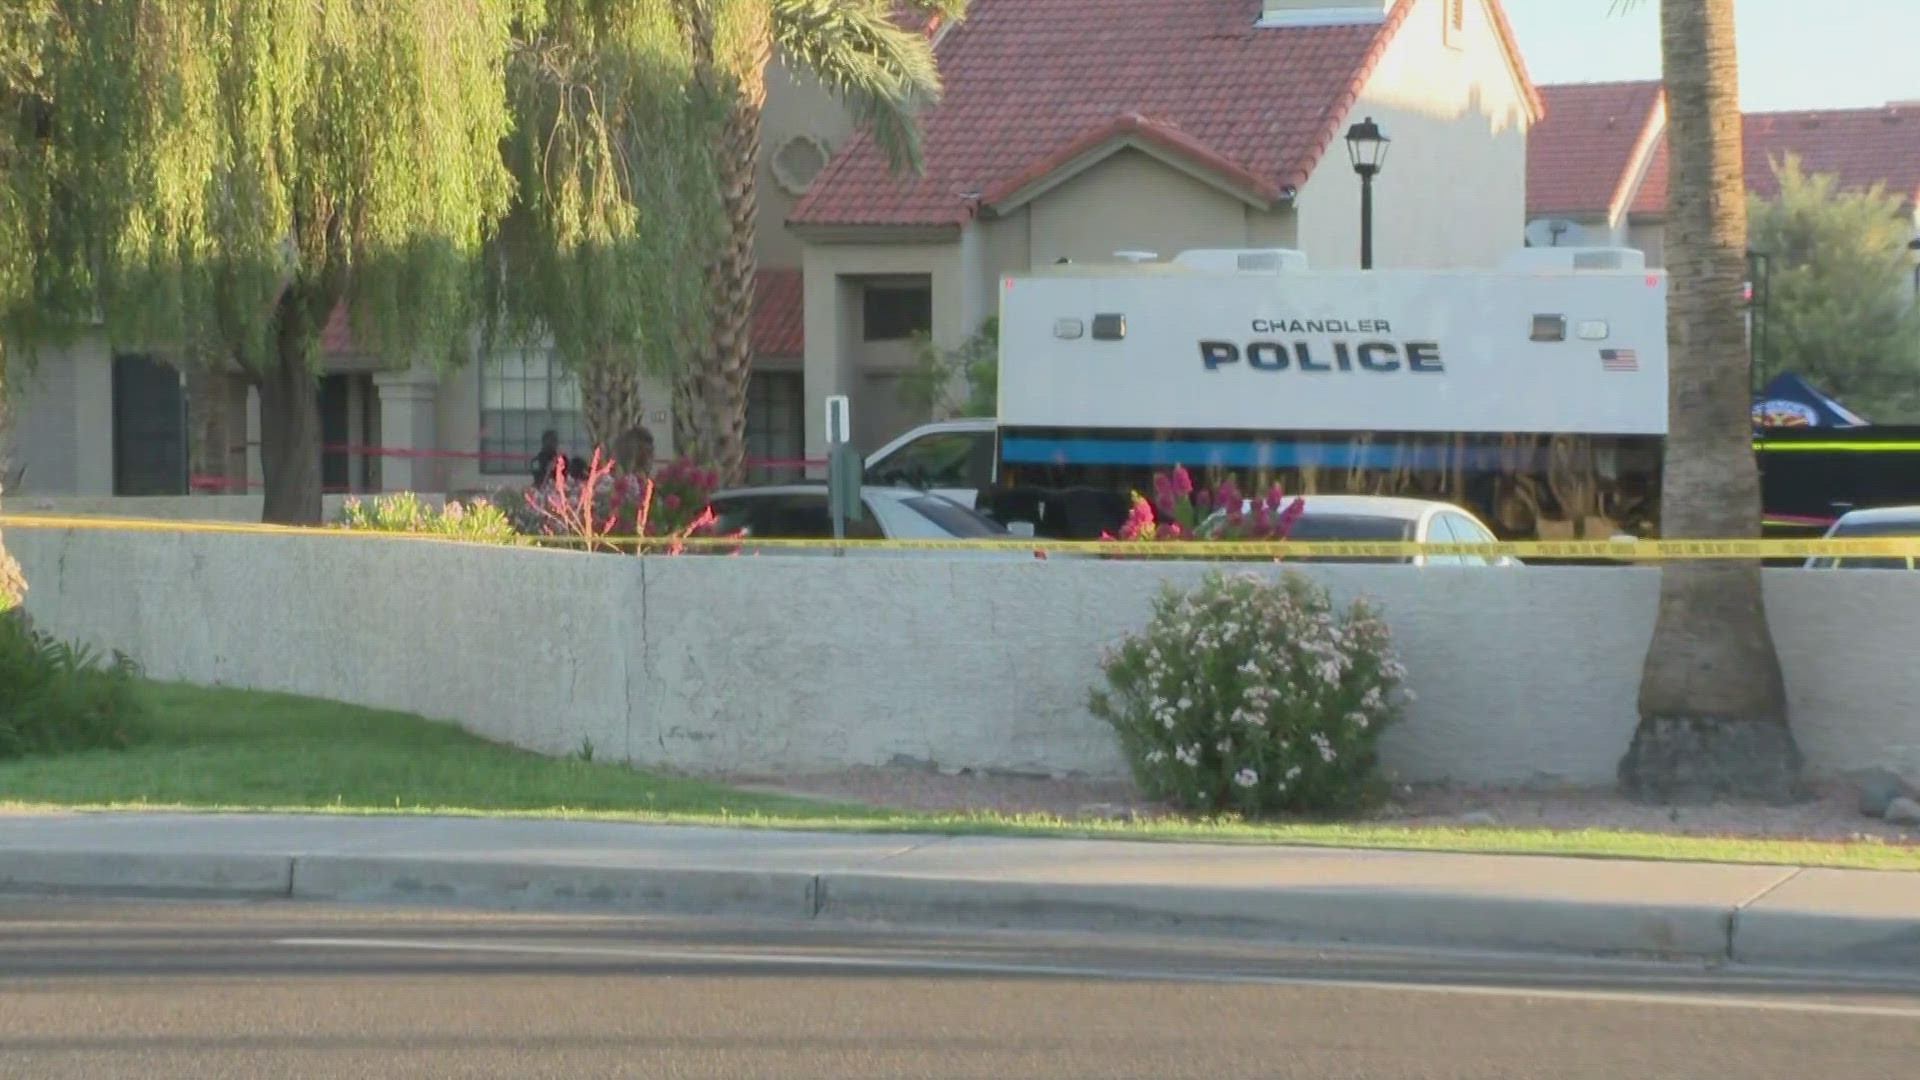 Two people were found dead after reports of a shooting in Chandler near Ray Road and McClintock Drive. Trisha Hendricks has the initial details.